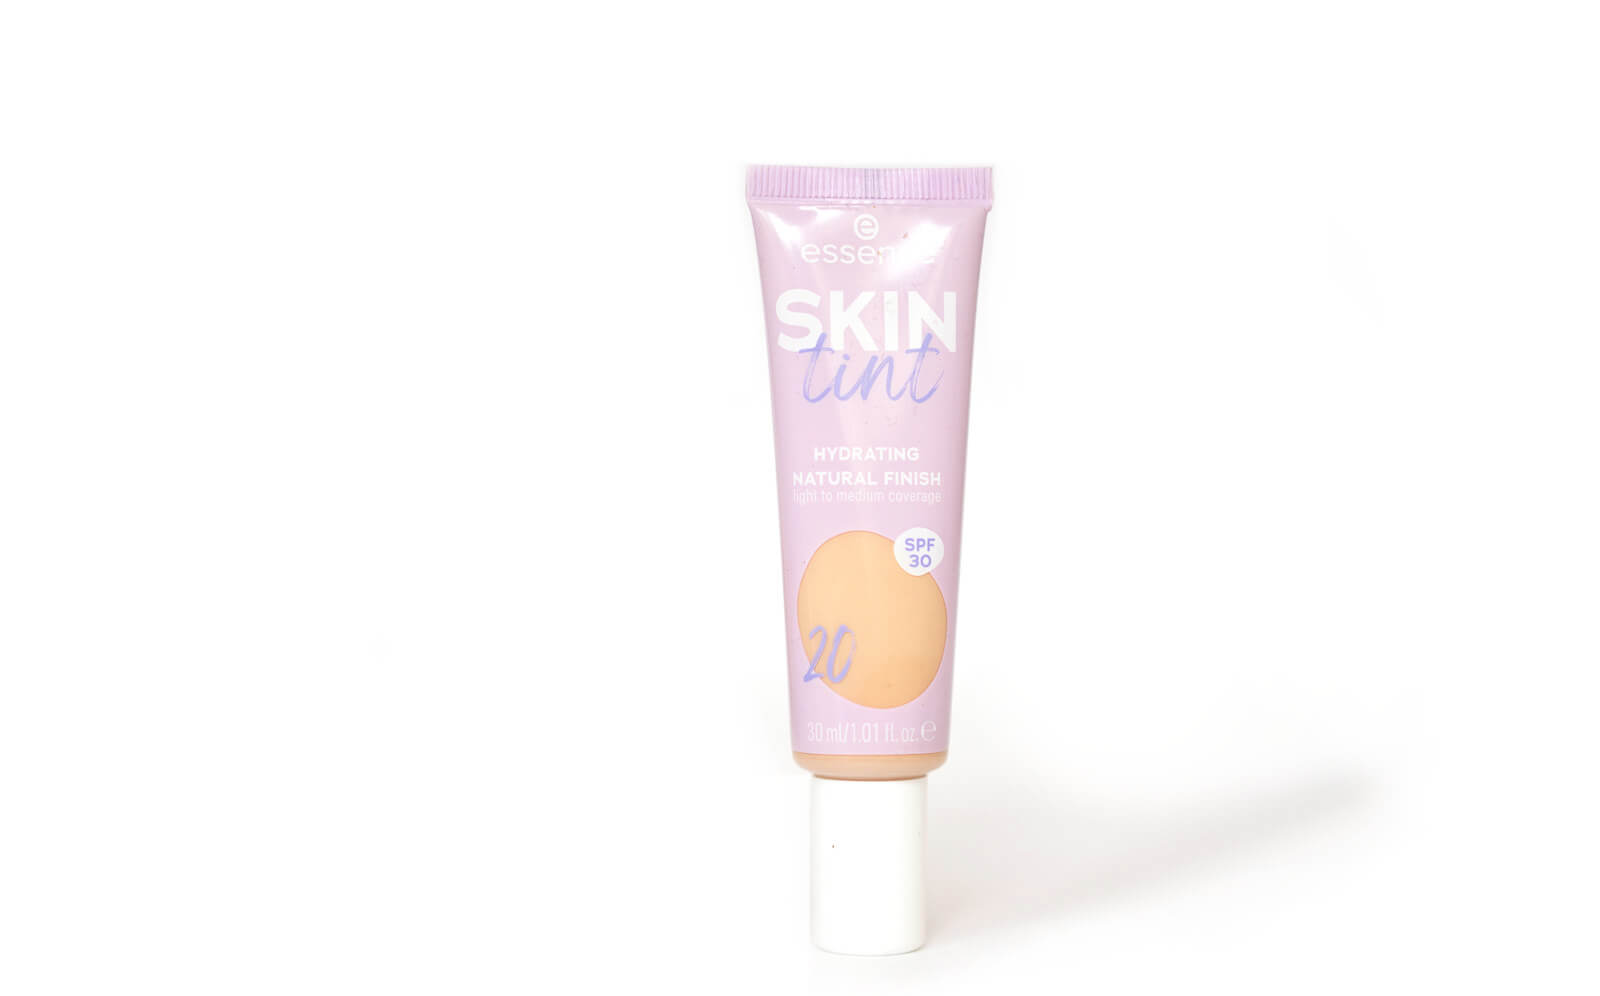 Review - Essence Foundation - Skin Tint Hydrating Natural Finish LSF 30 im Test 3